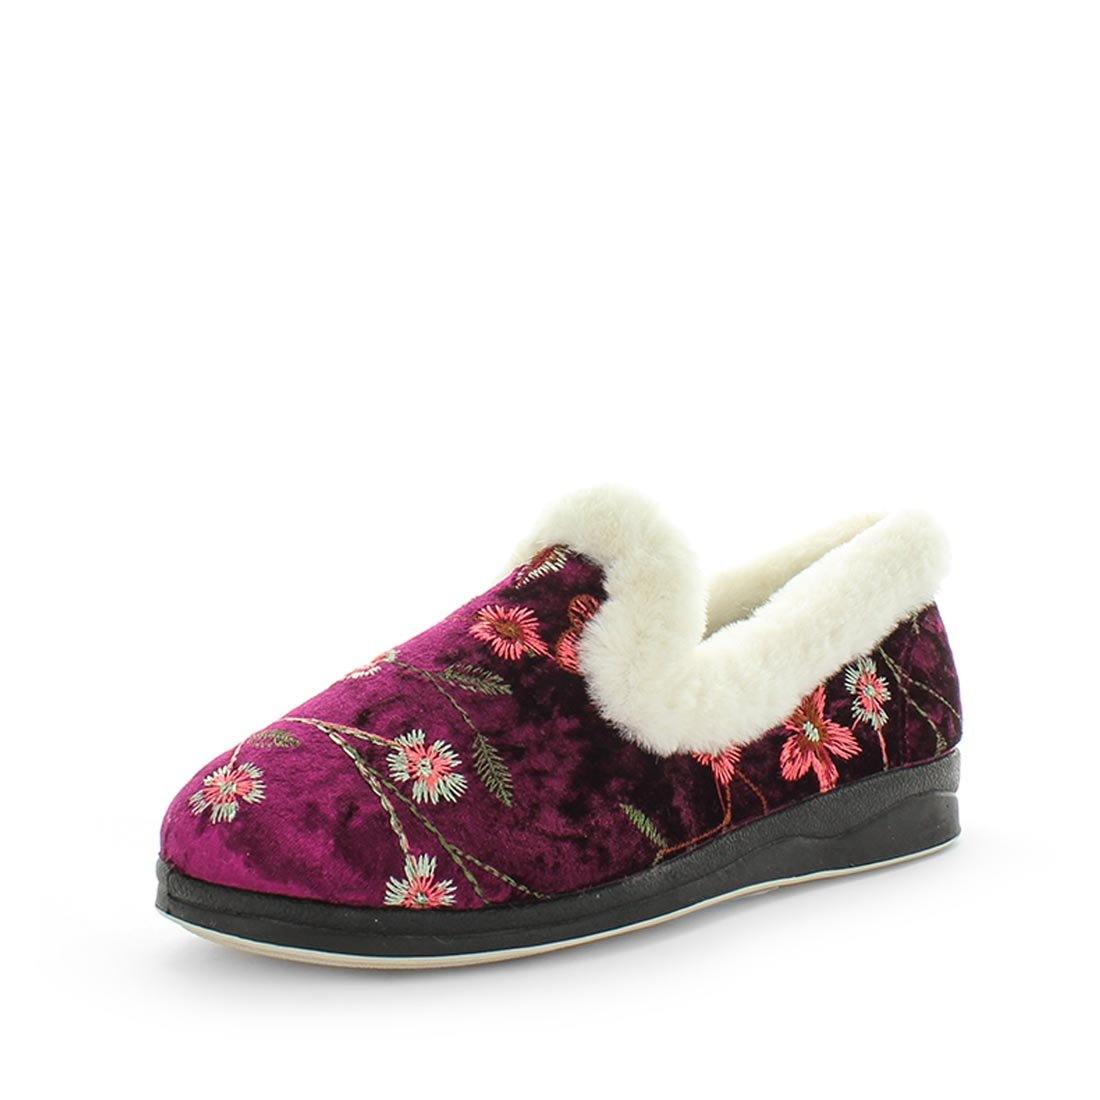 Classic womens slip on slipper, Emille by panda slippers. A slip on style slipper made with soft materials and comfy fit design for the perfect indoor slipper. showing a non slip sole and micro terry trimming - comfort slippers - womens comfort slippers